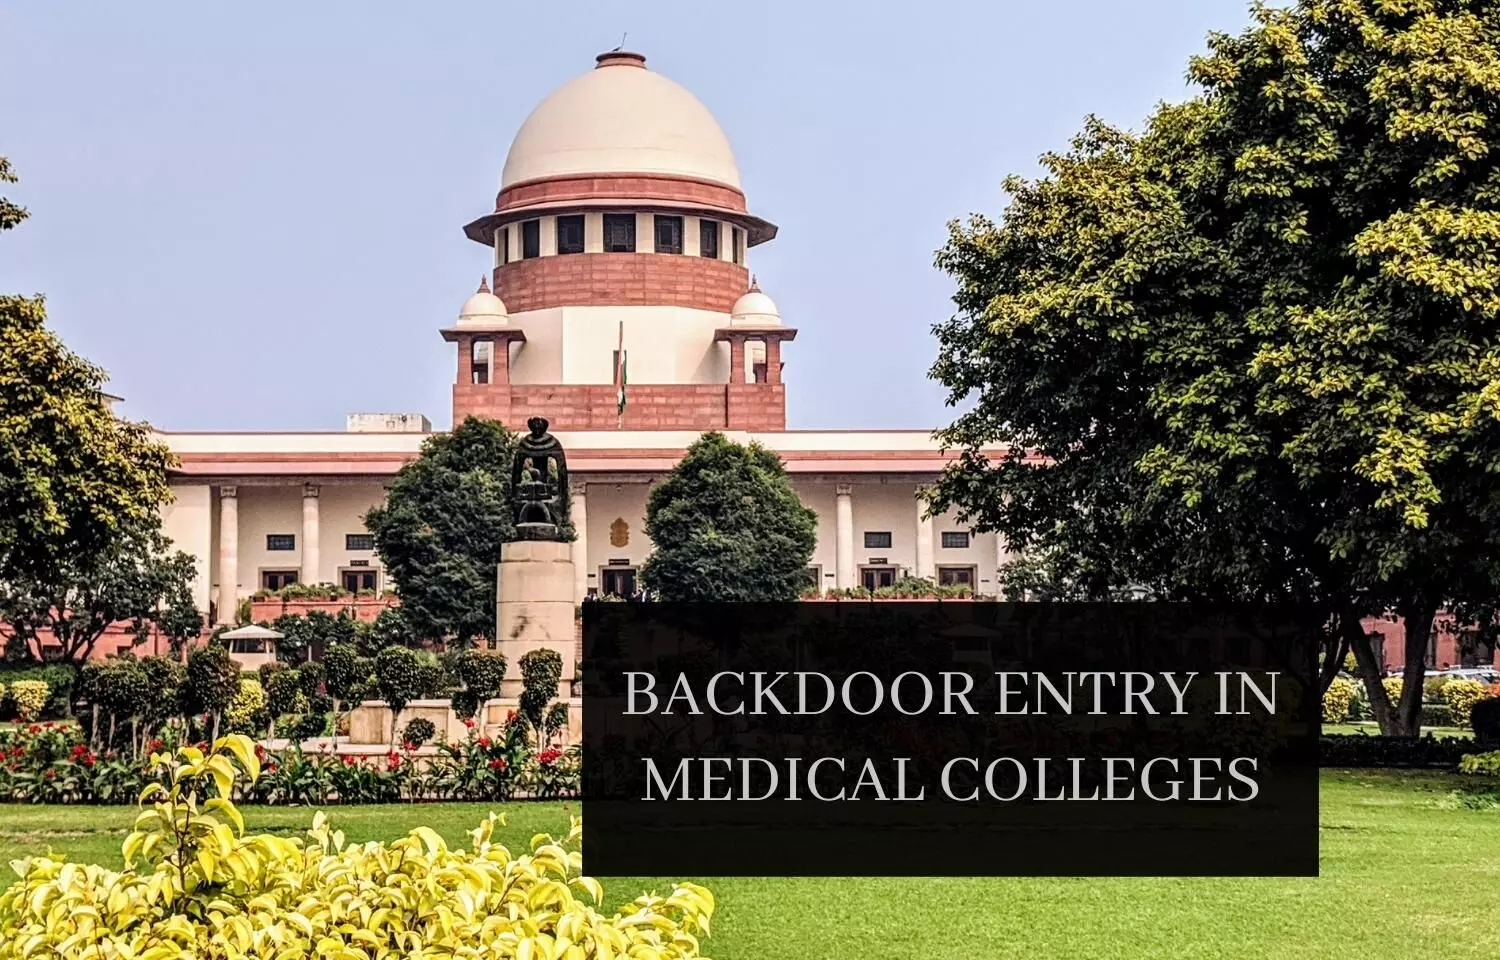 Backdoor Entry in Medical Colleges: Supreme Court issues notice to NMC